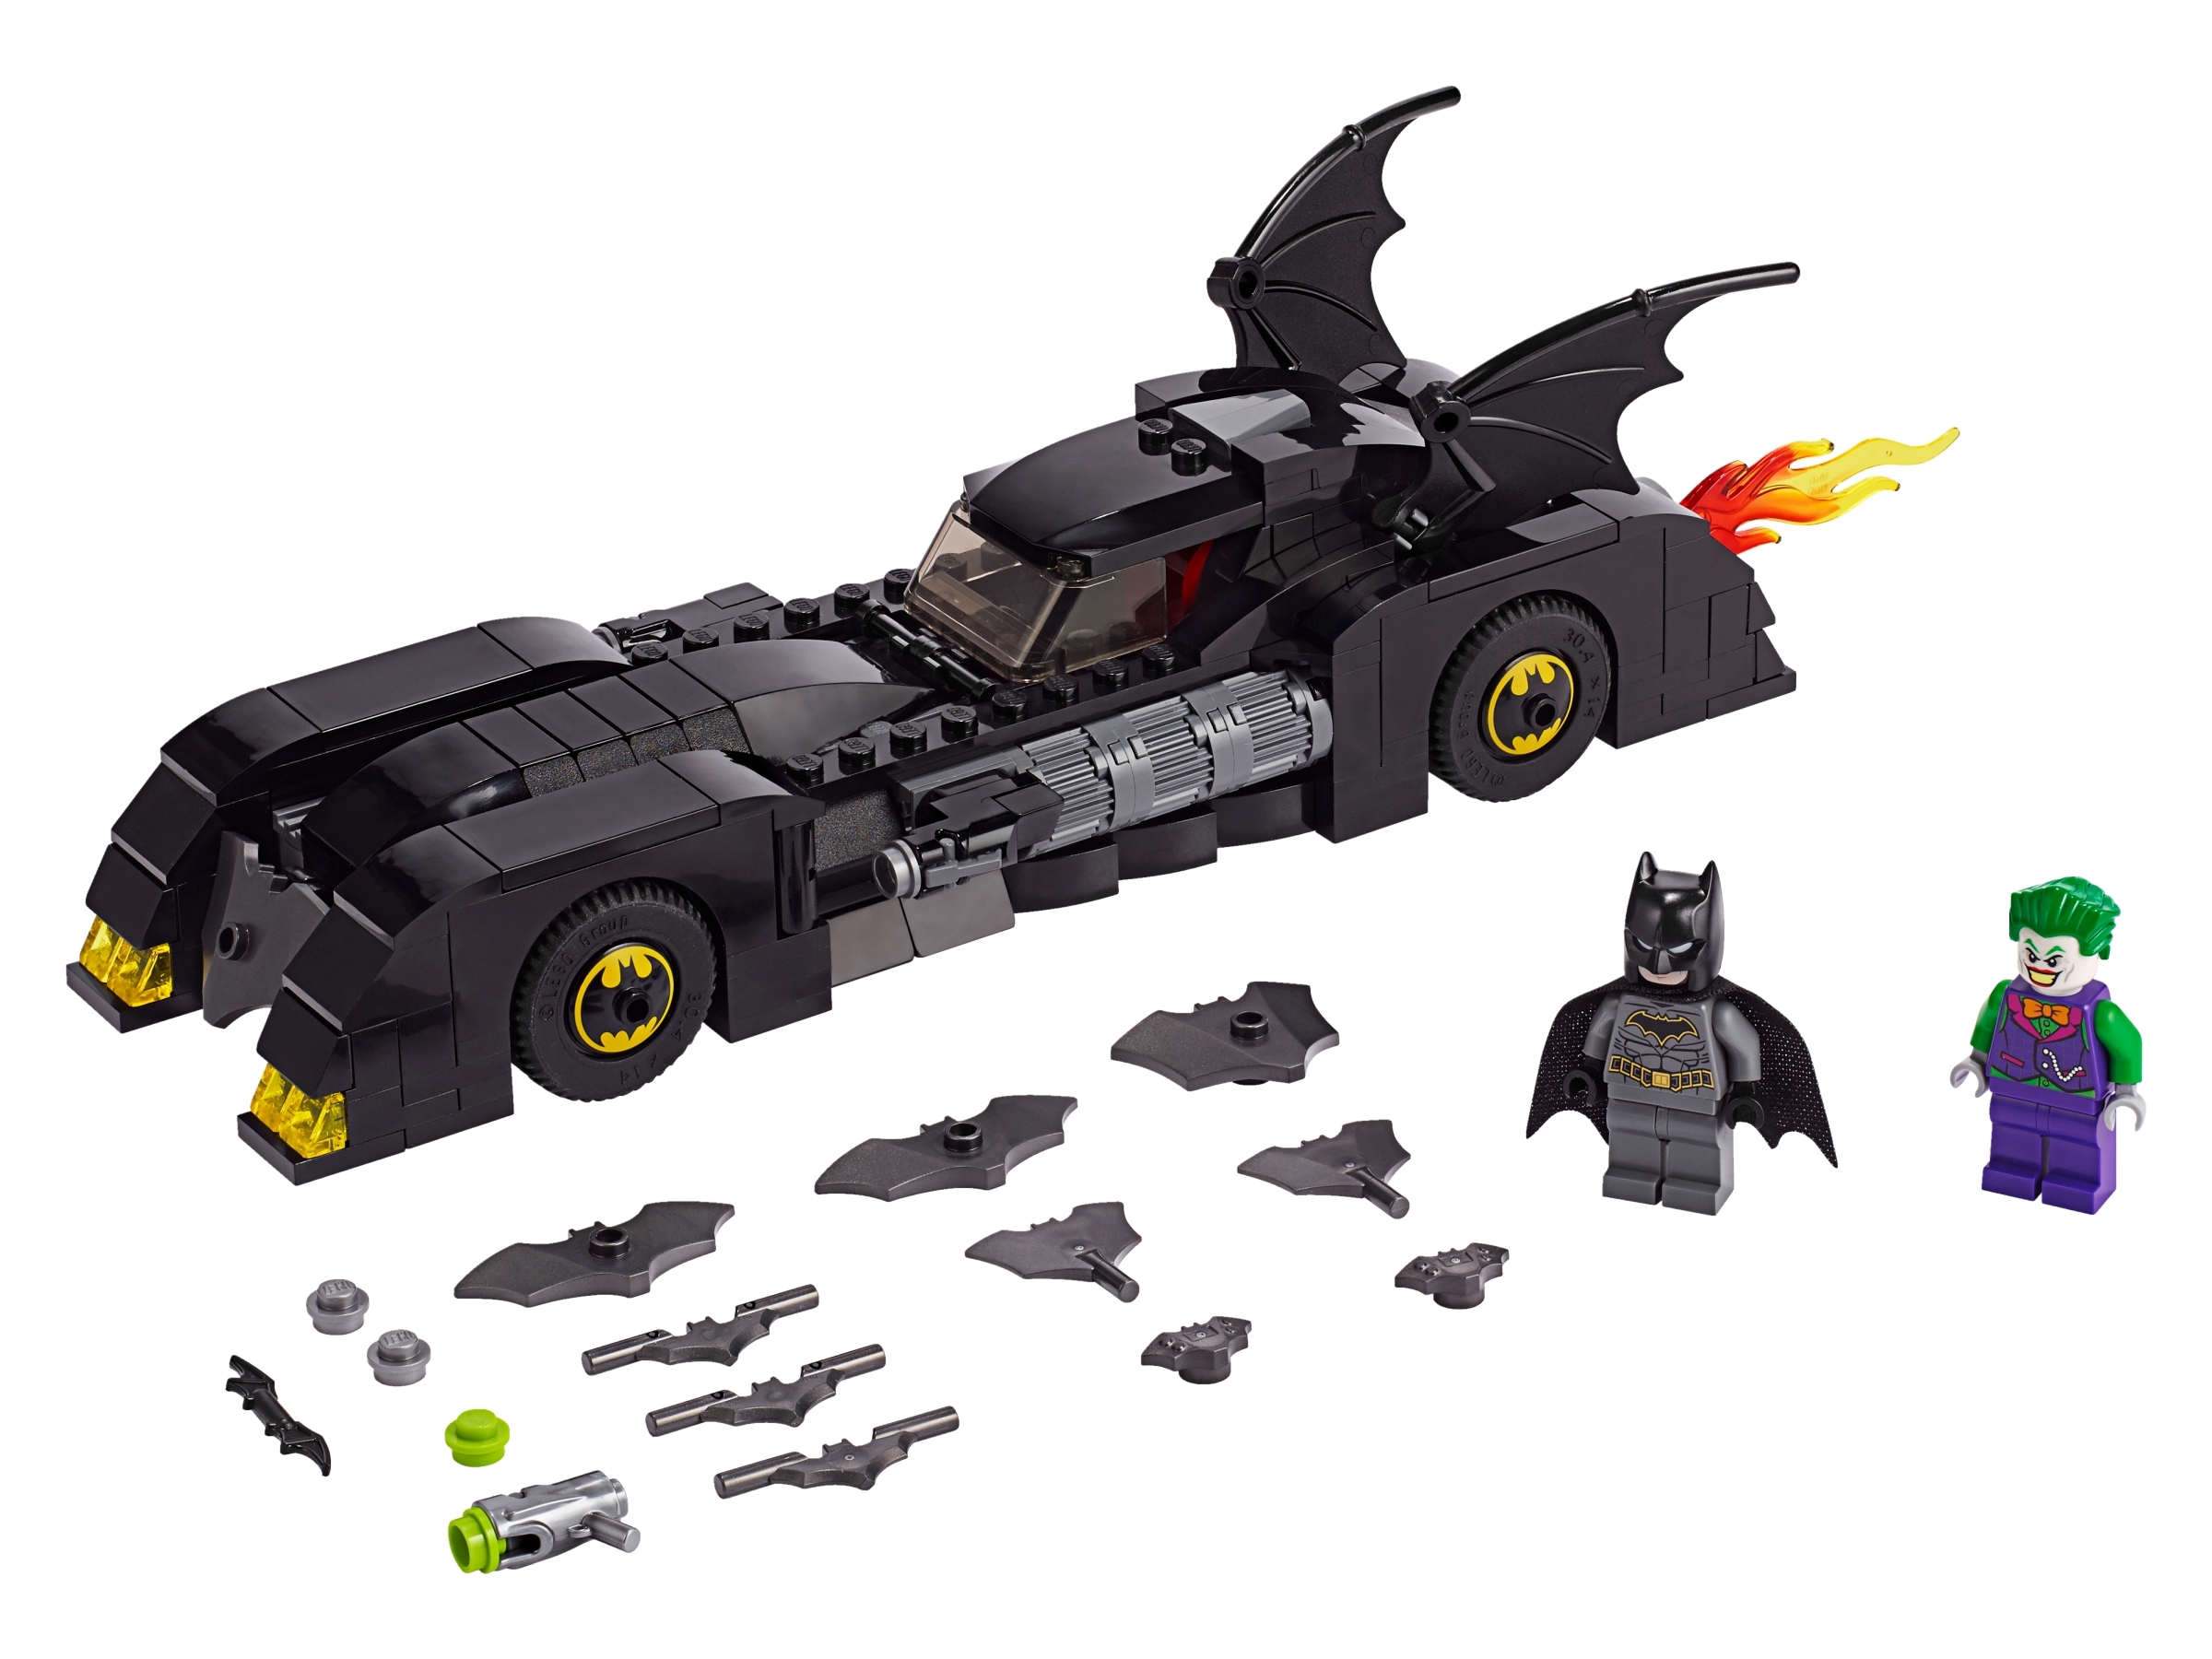 Lego Batman Merchandise Cheaper Than Retail Price Buy Clothing Accessories And Lifestyle Products For Women Men